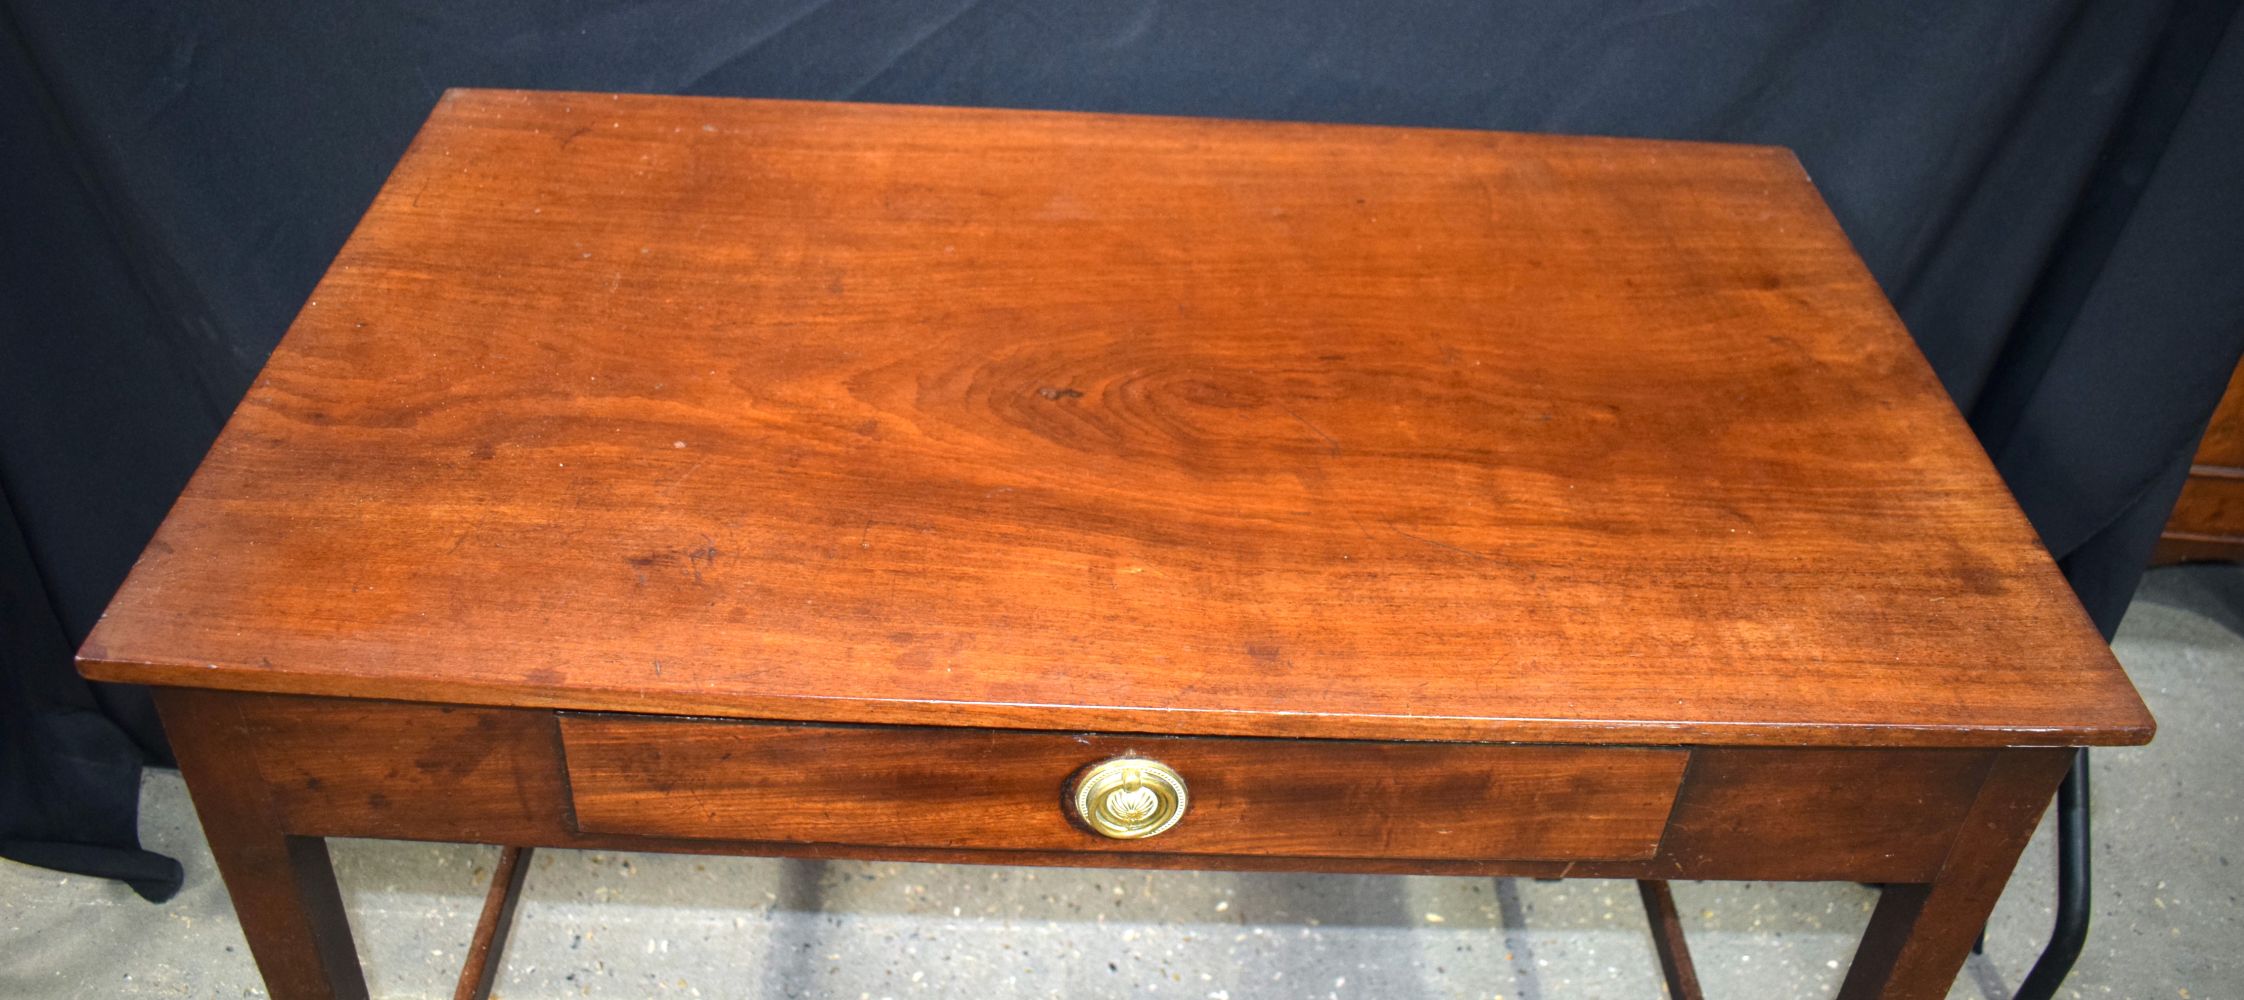 An antique mahogany single drawer Hall table 71 x 94 x 54 cm. - Image 6 of 8